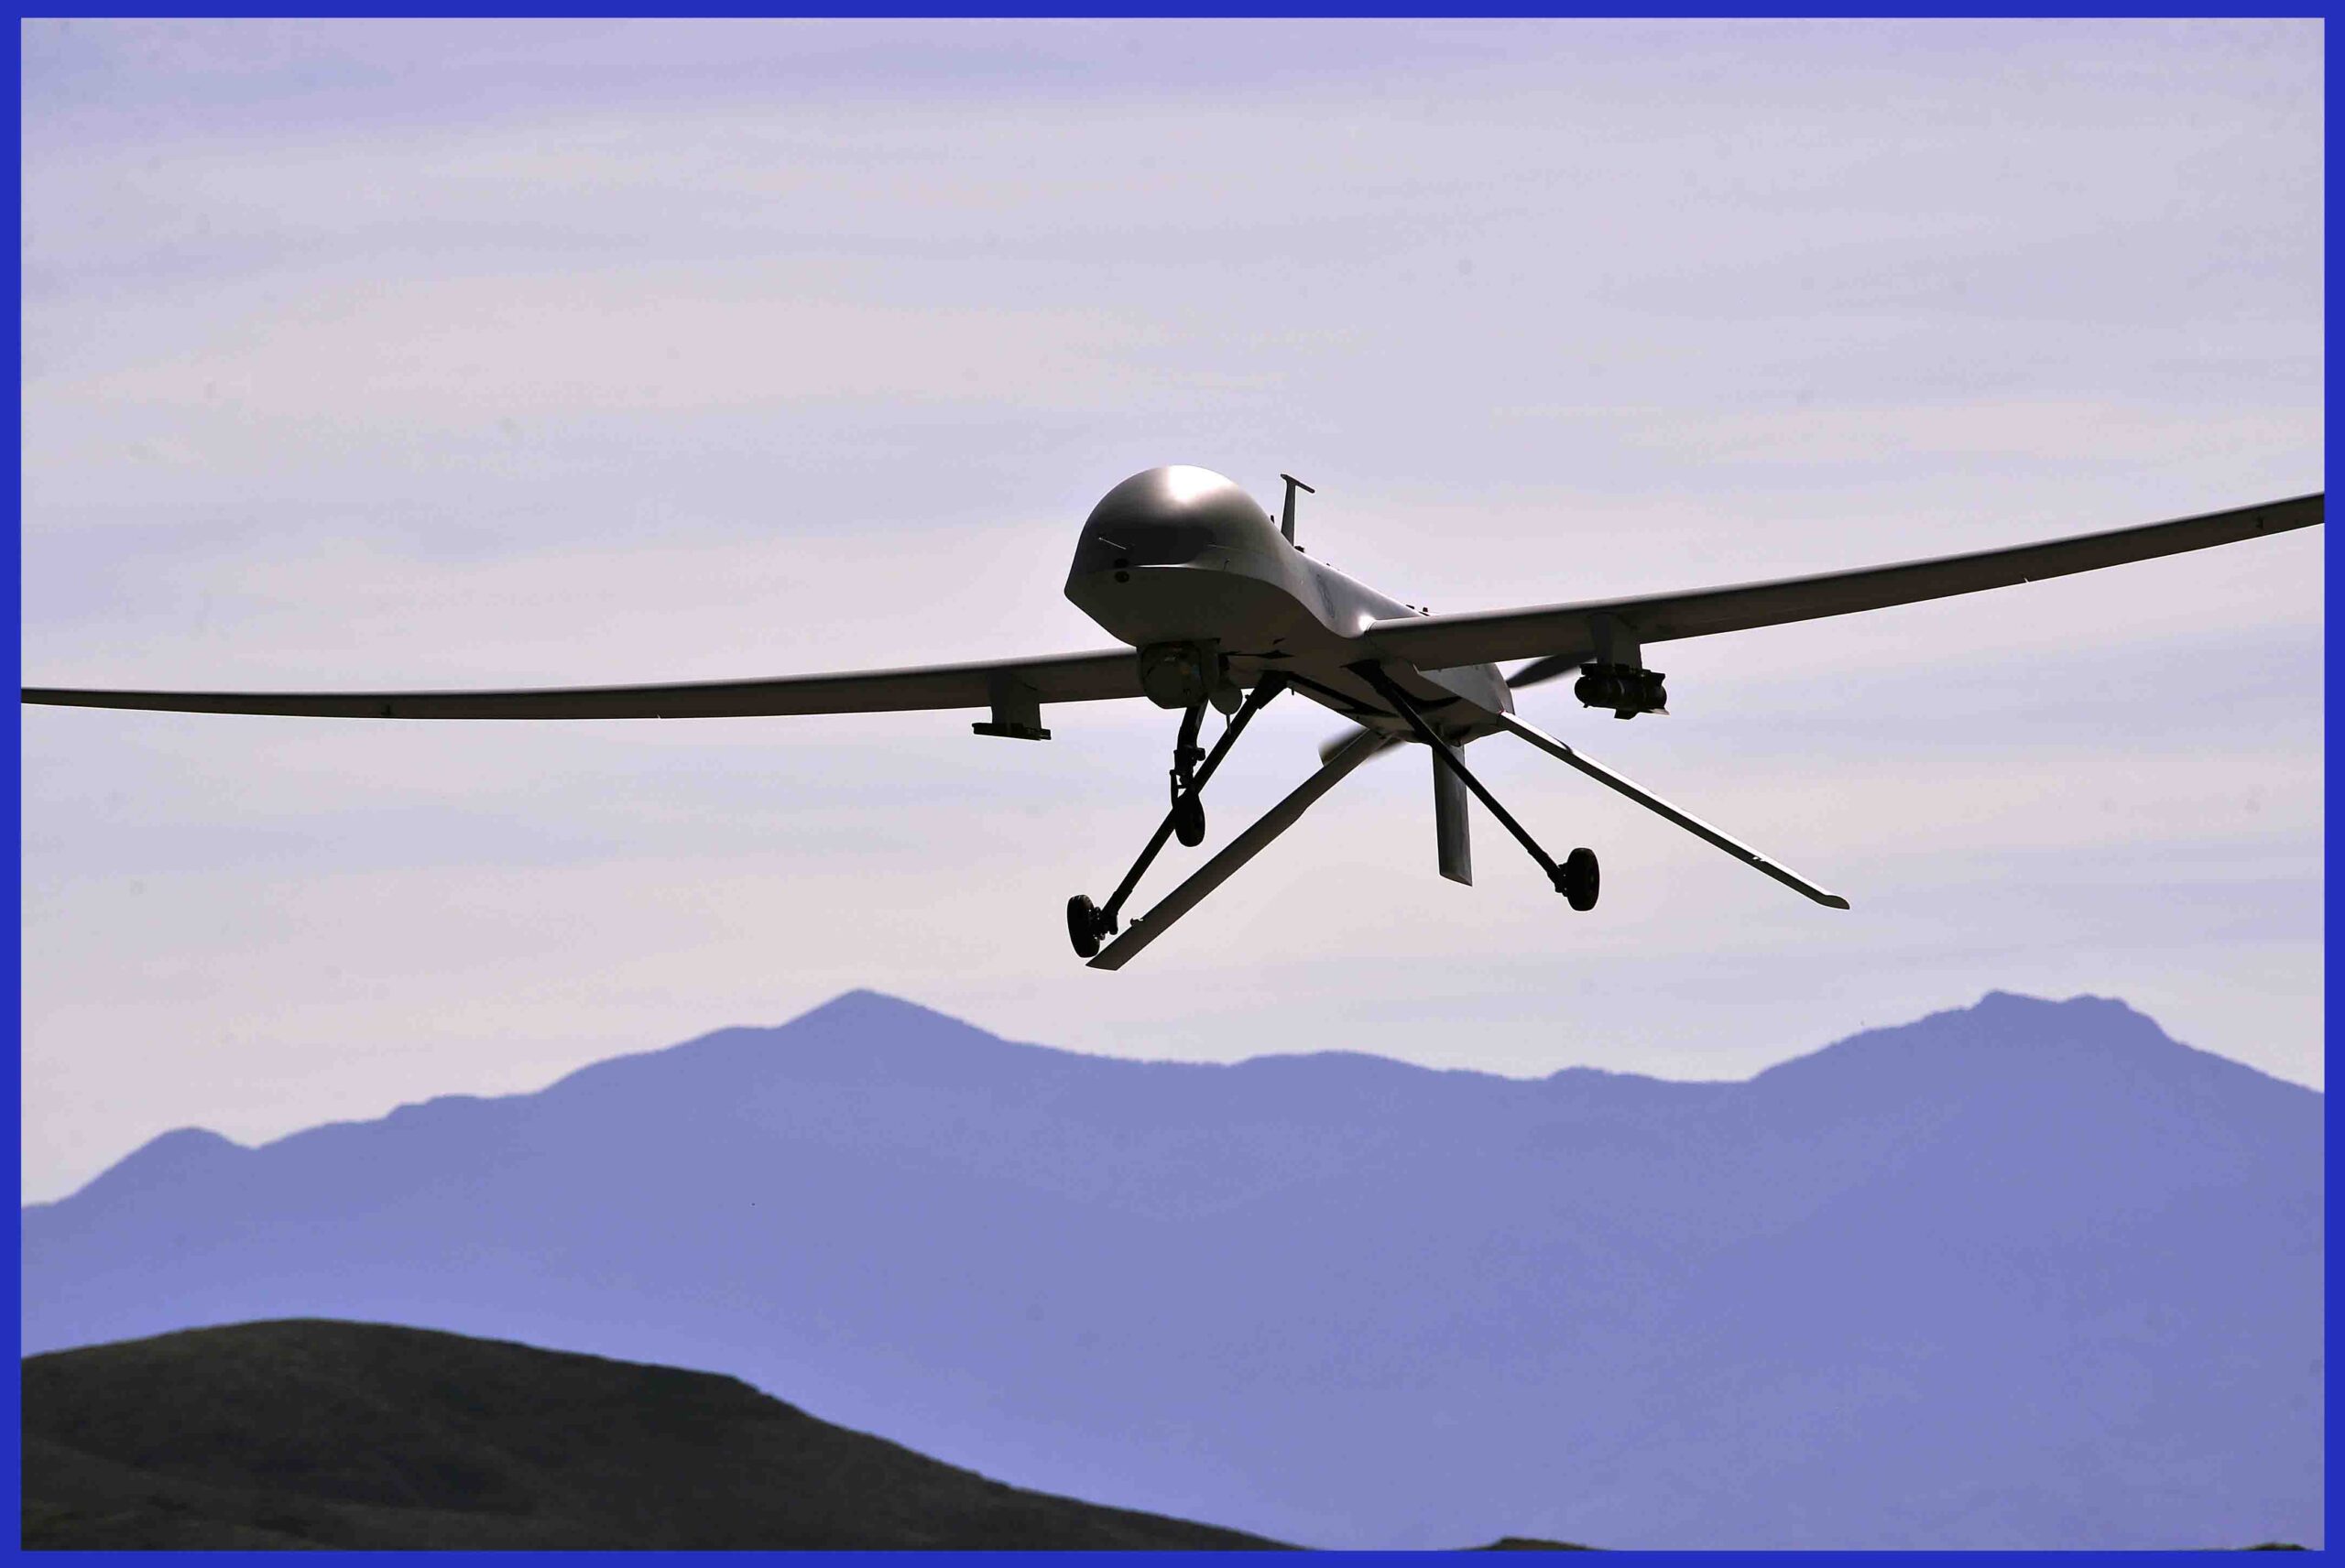 Photo Credit: USAF / An MQ-1B Predator remotely piloted aircraft during a training mission on May 13, 2013. Predators excel in various missions: intelligence, surveillance, reconnaissance, close air support, precision strike, and more. These capabilities make it ideal for irregular warfare in support of combatant commanders' objectives.